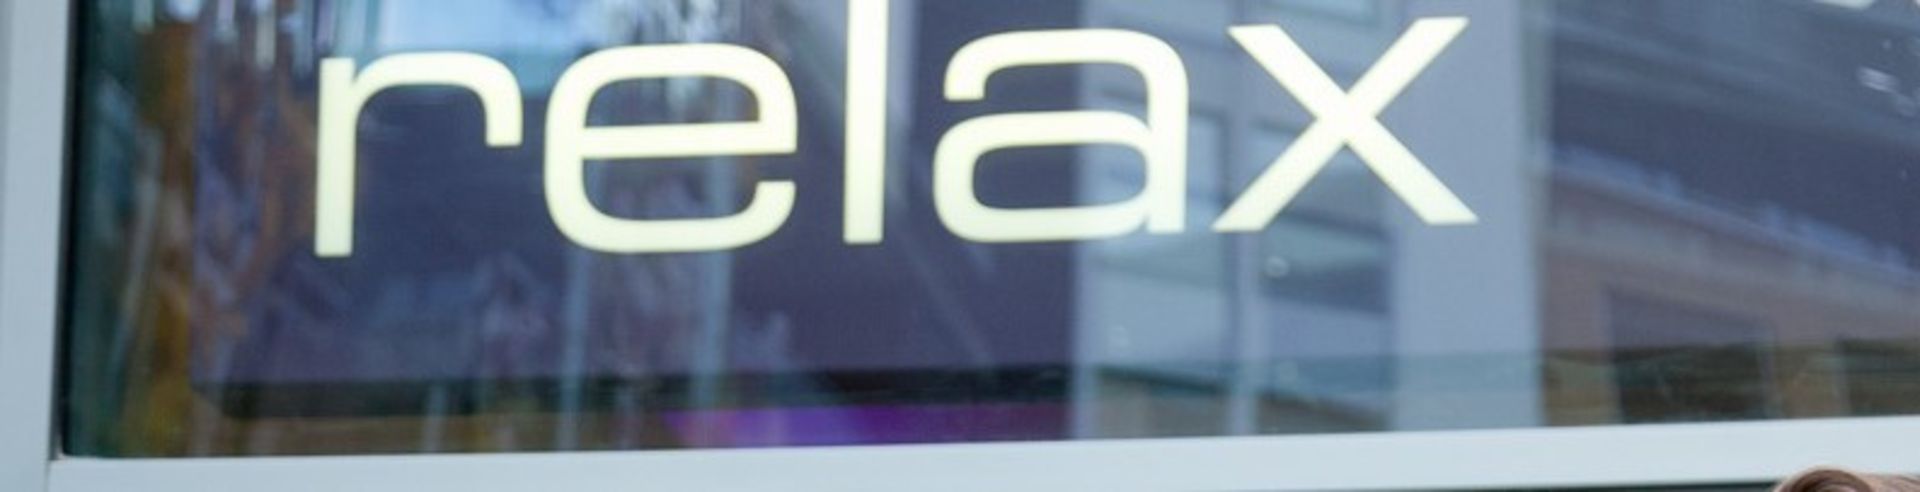 1 x Cool White RELAX Advertisement Illuminated Signage - Individual Perspex Letters Mounted on Rails - Image 5 of 5